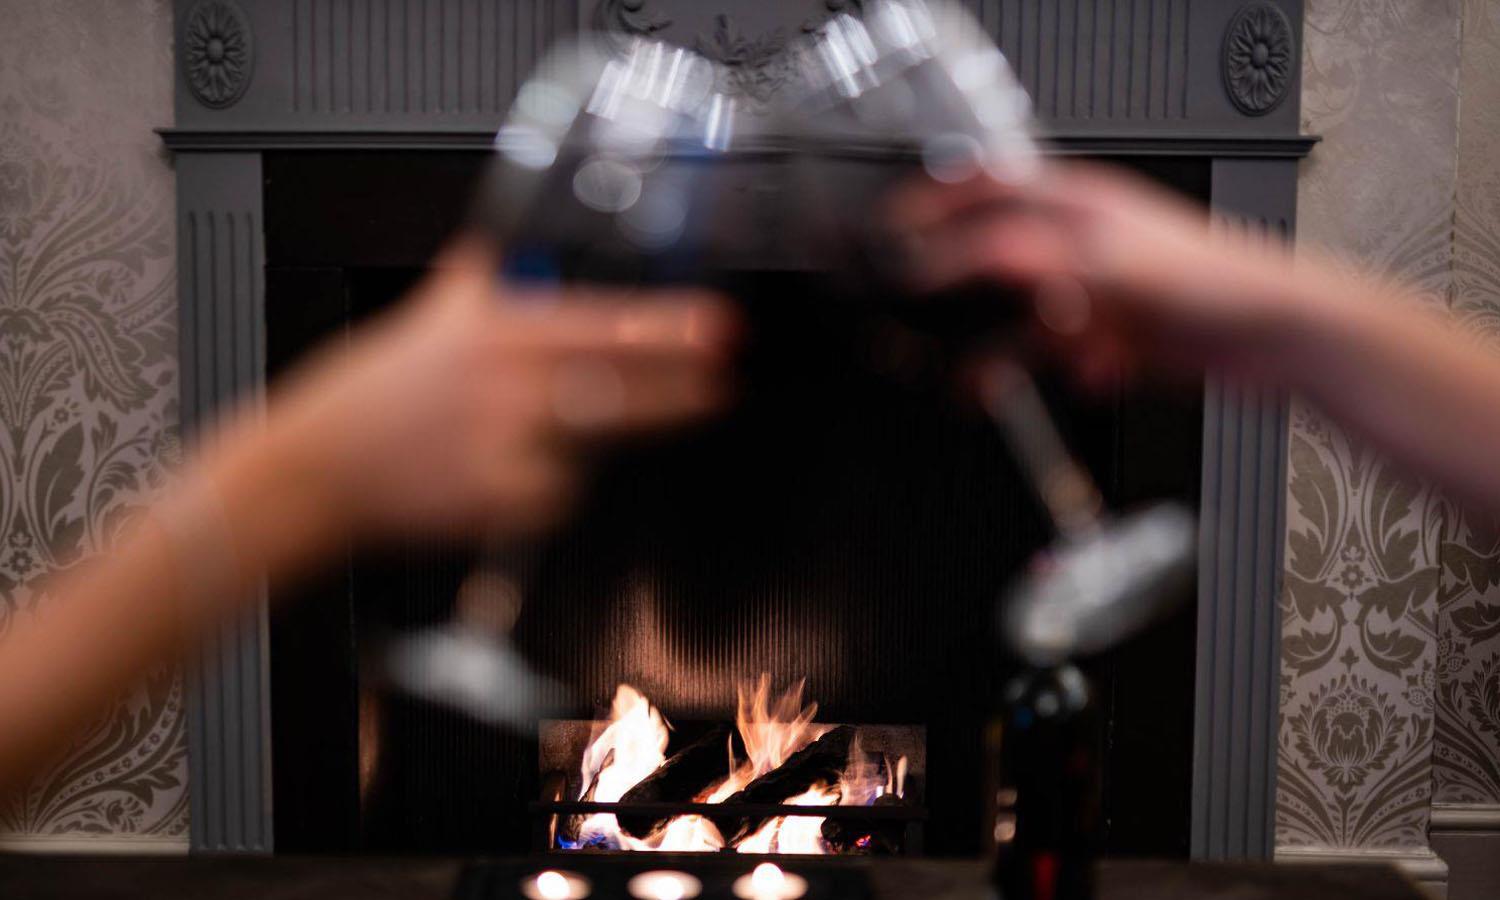 Two glasses being clinked together in front of open fire